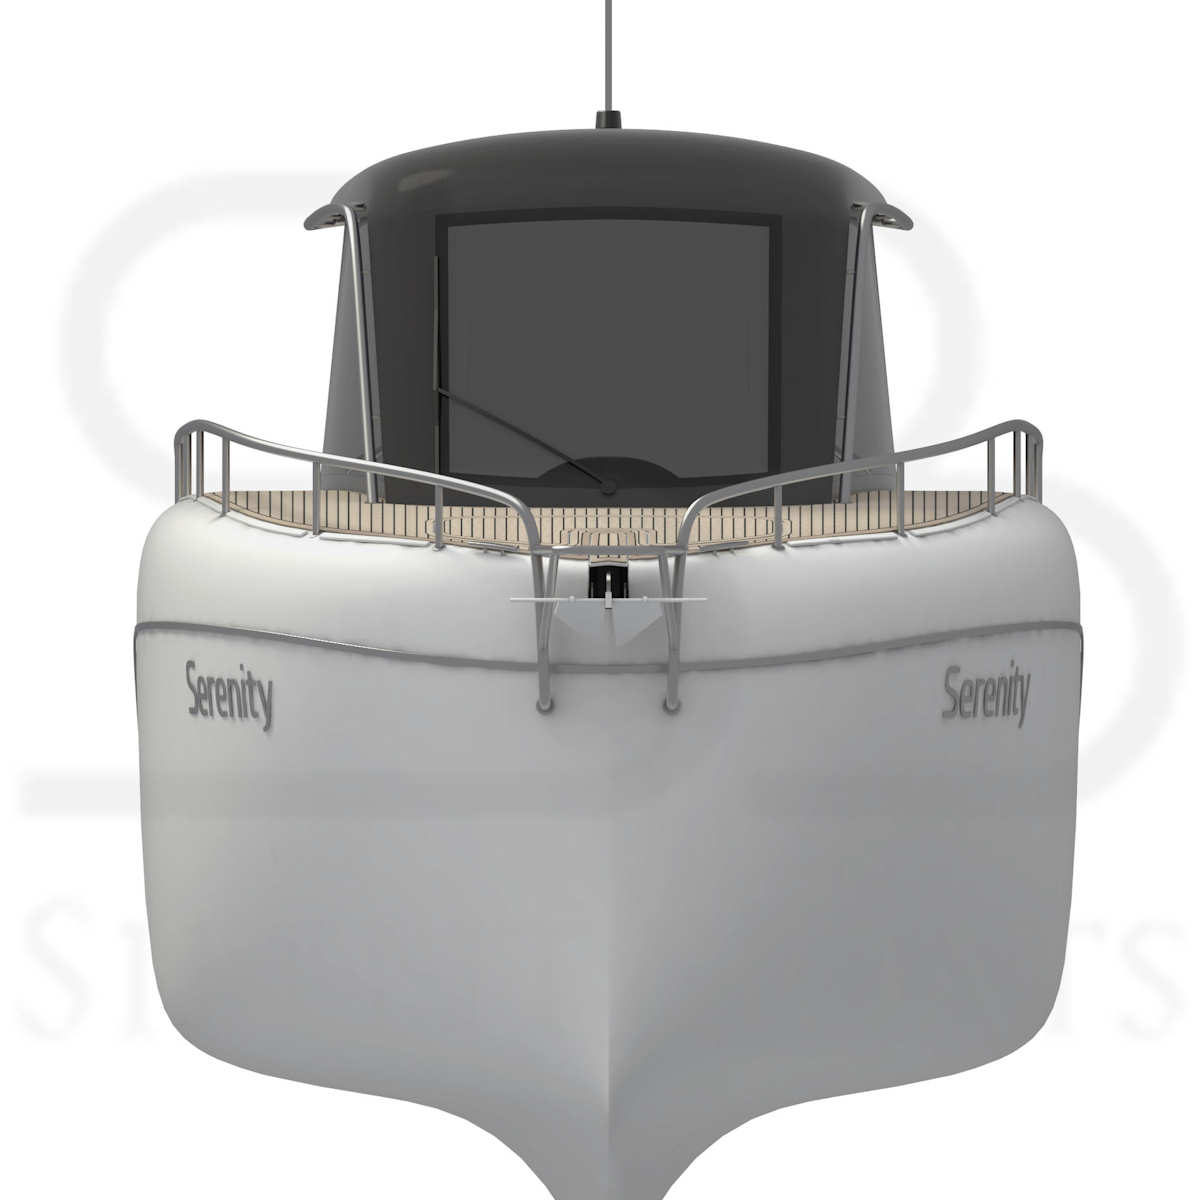 serenity-boat-front-view_01